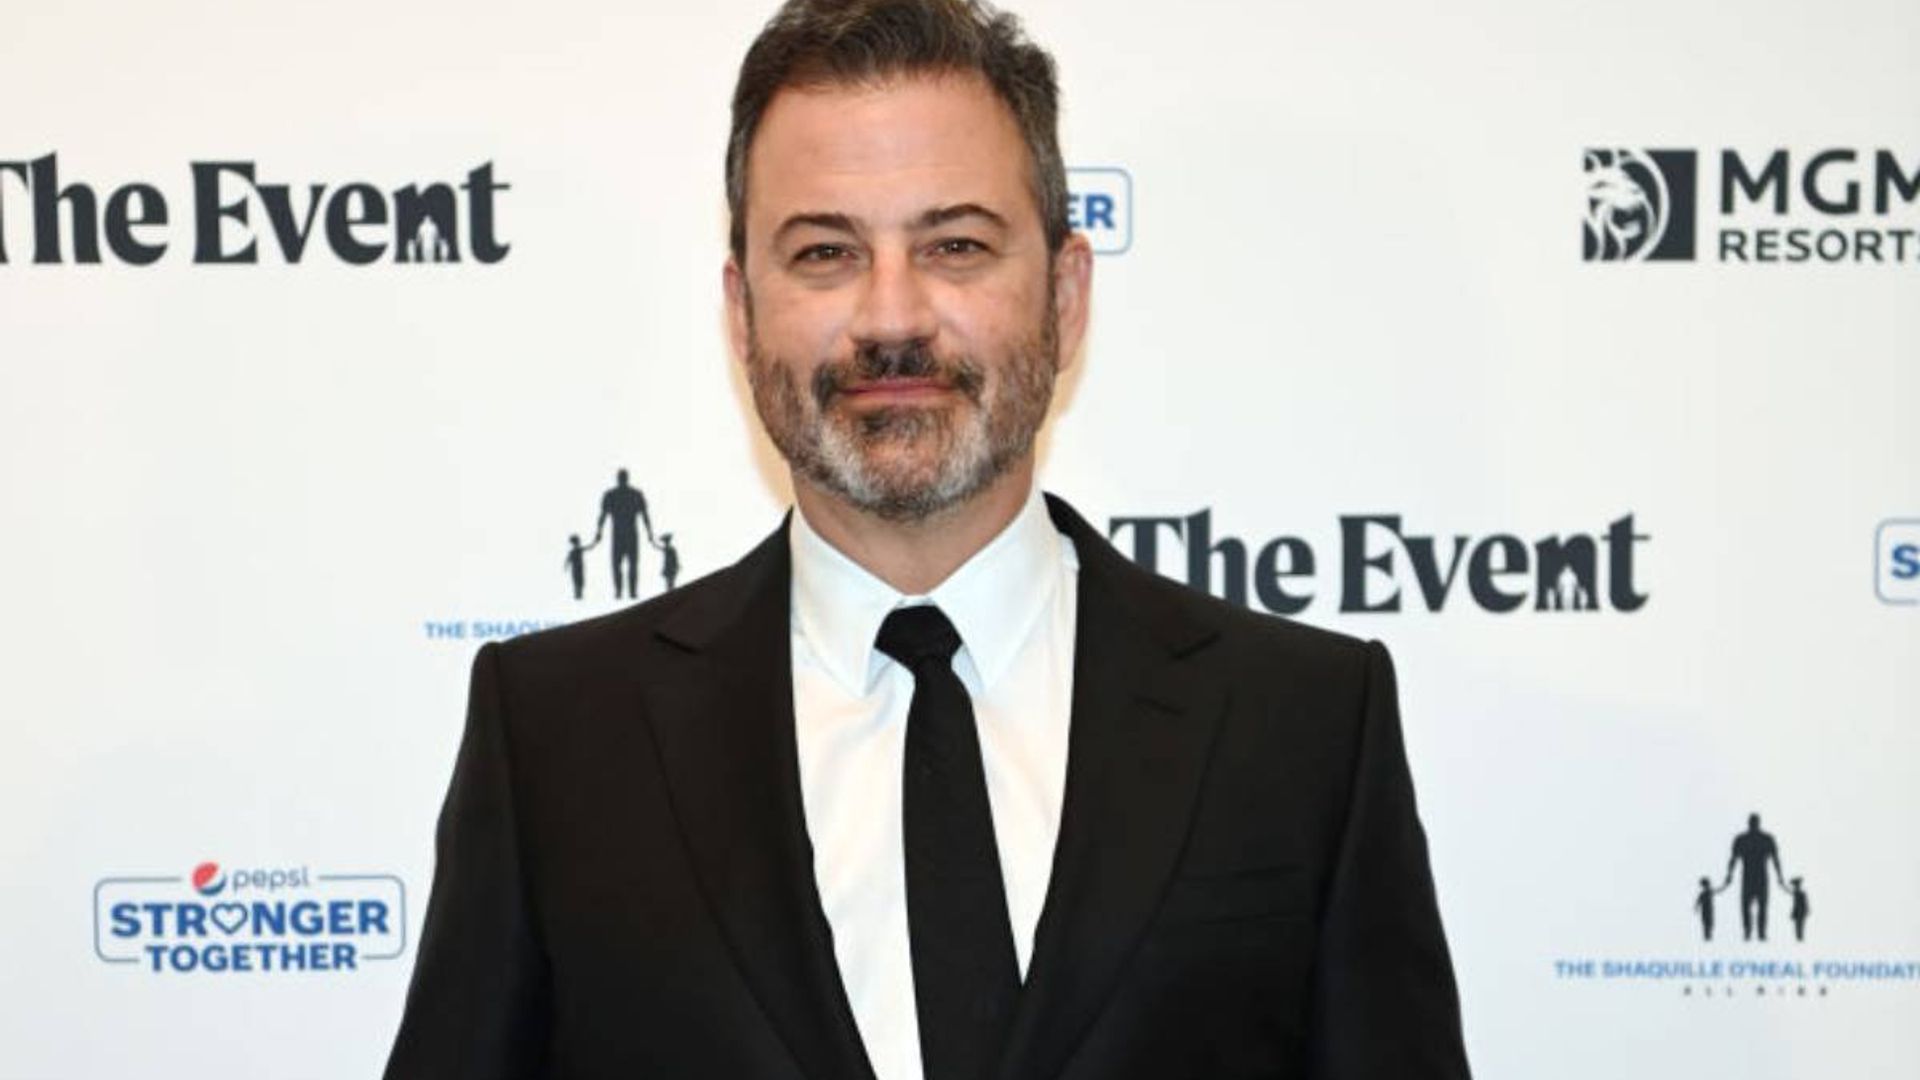 Jimmy Kimmel narrowly escapes injury while cooking Thanksgiving dinner - see the photos